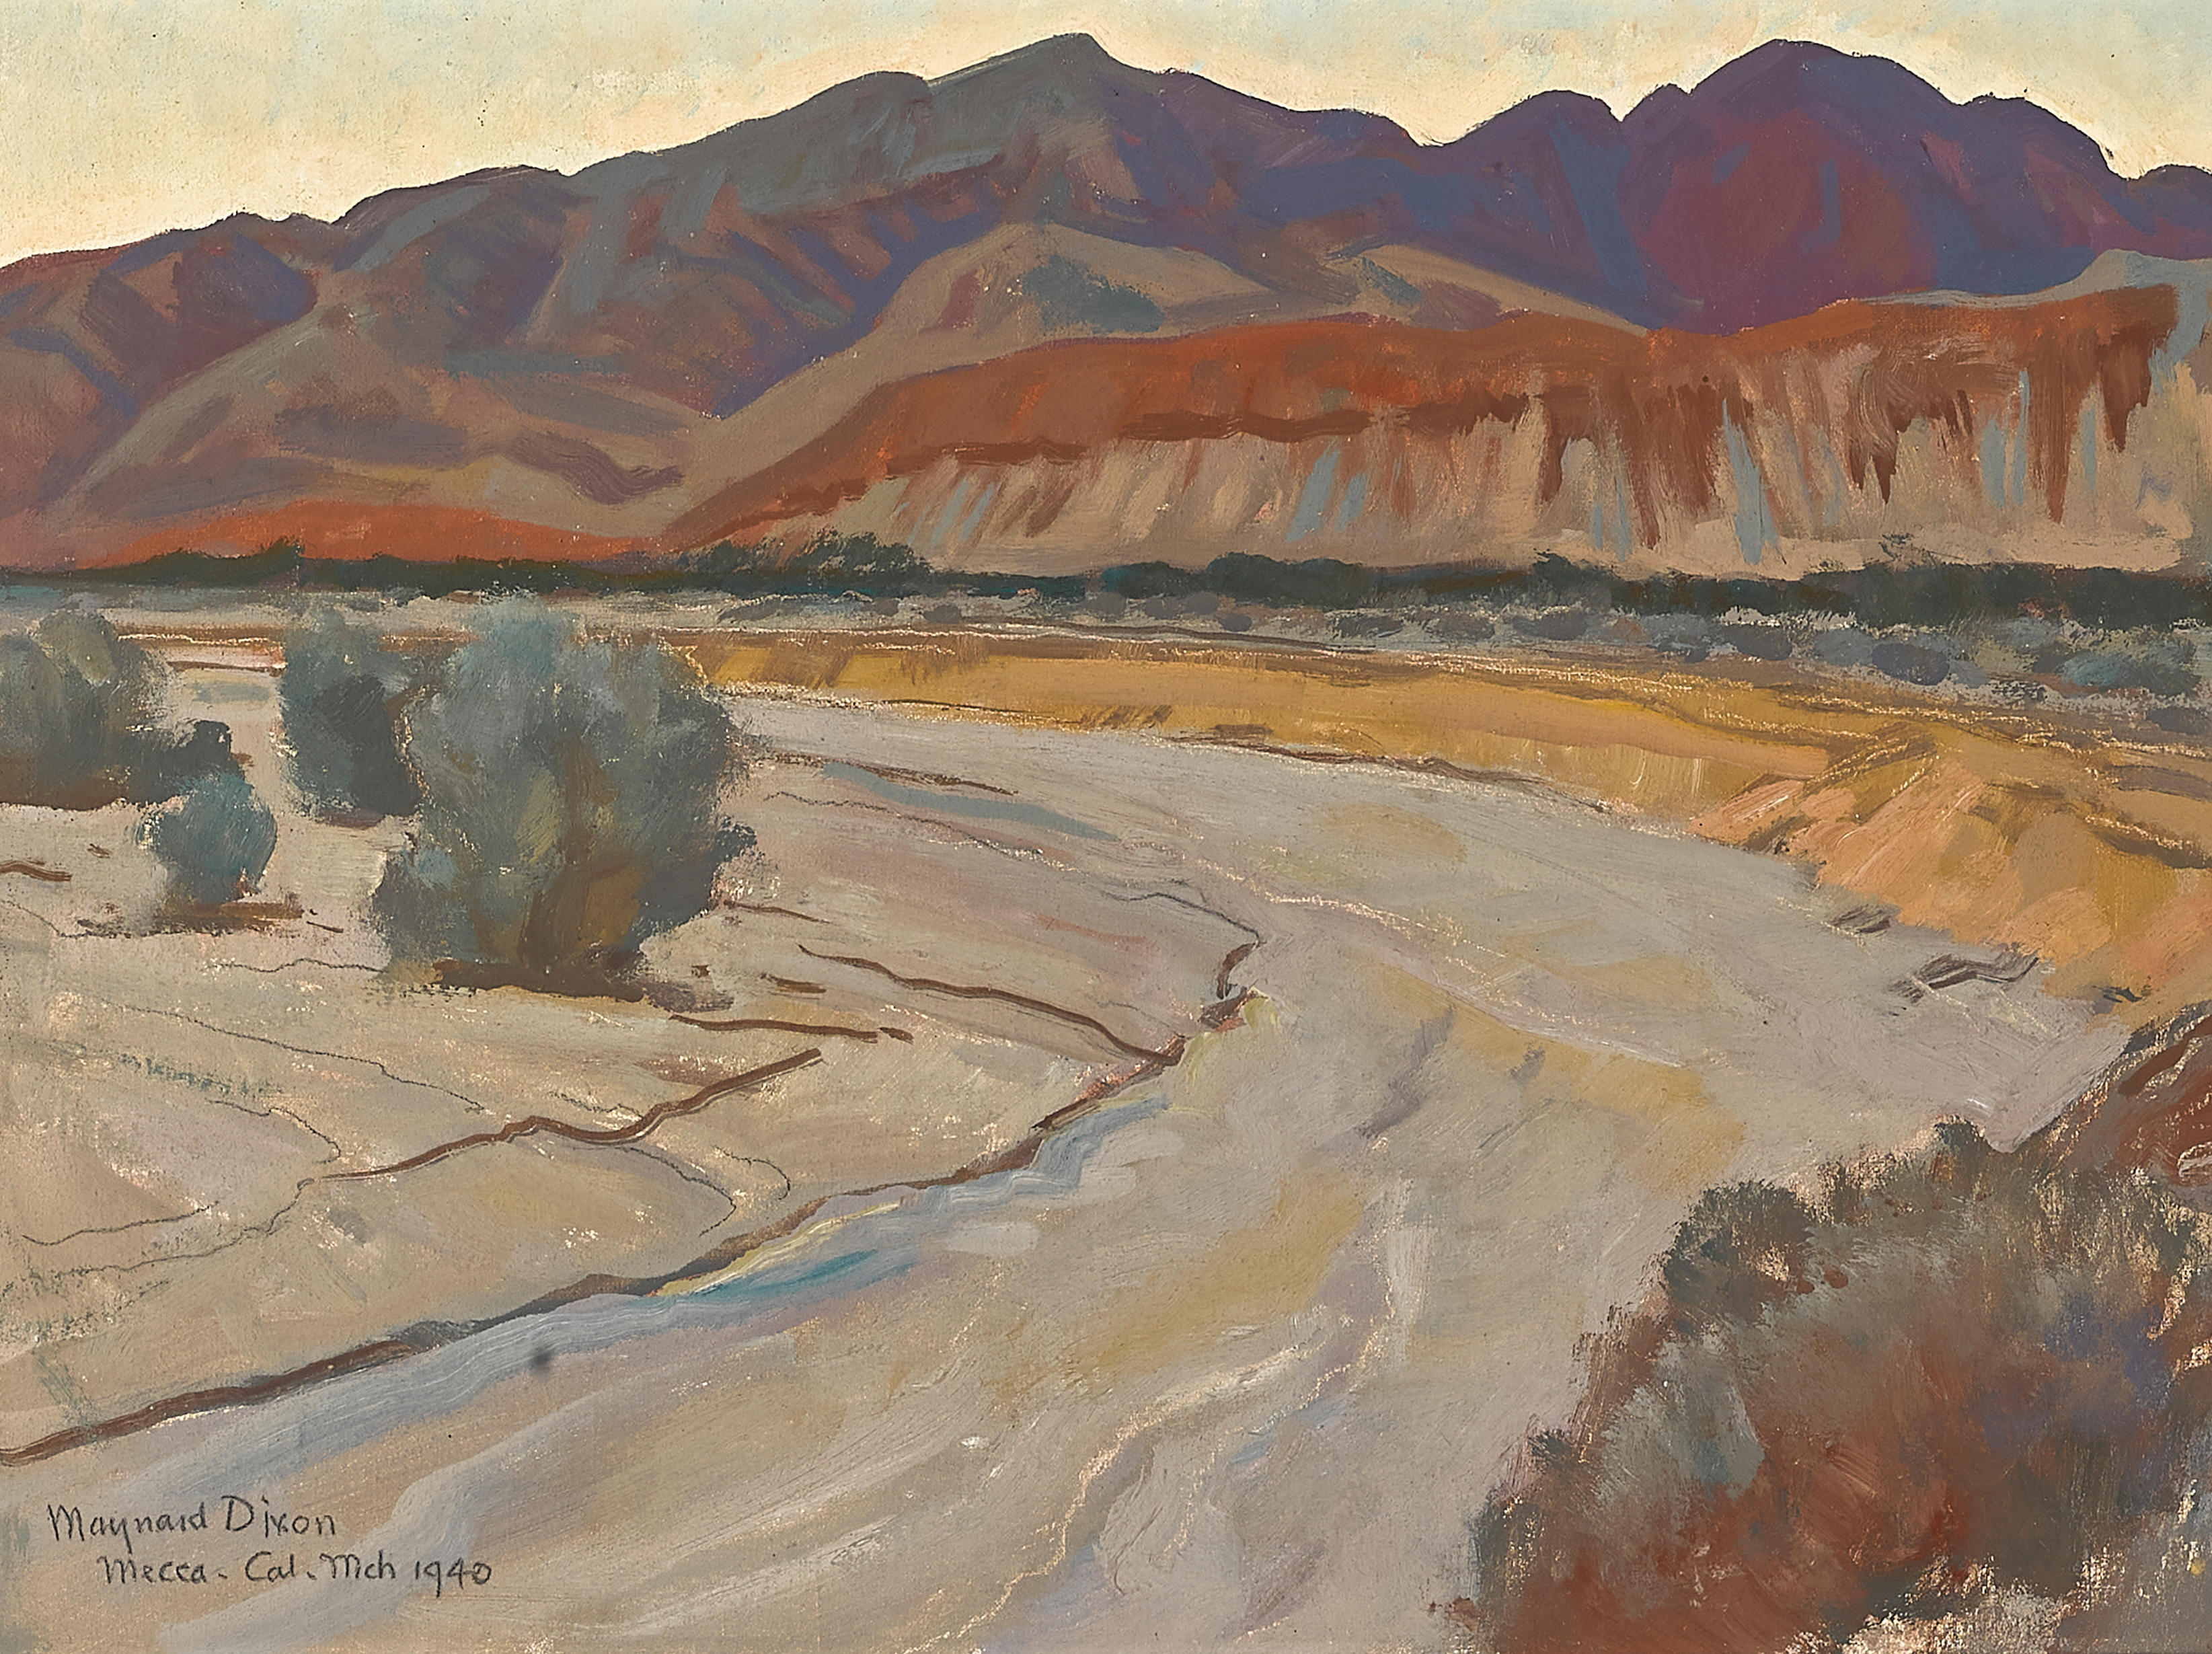 Maynard Dixon (1875-1946) Evening on Orocopio (Painted Canyon), Imperial Valley 9 3/4 x 13 3/4in framed 16 1/2 x 20 1/4in (Painted in March 1940.)